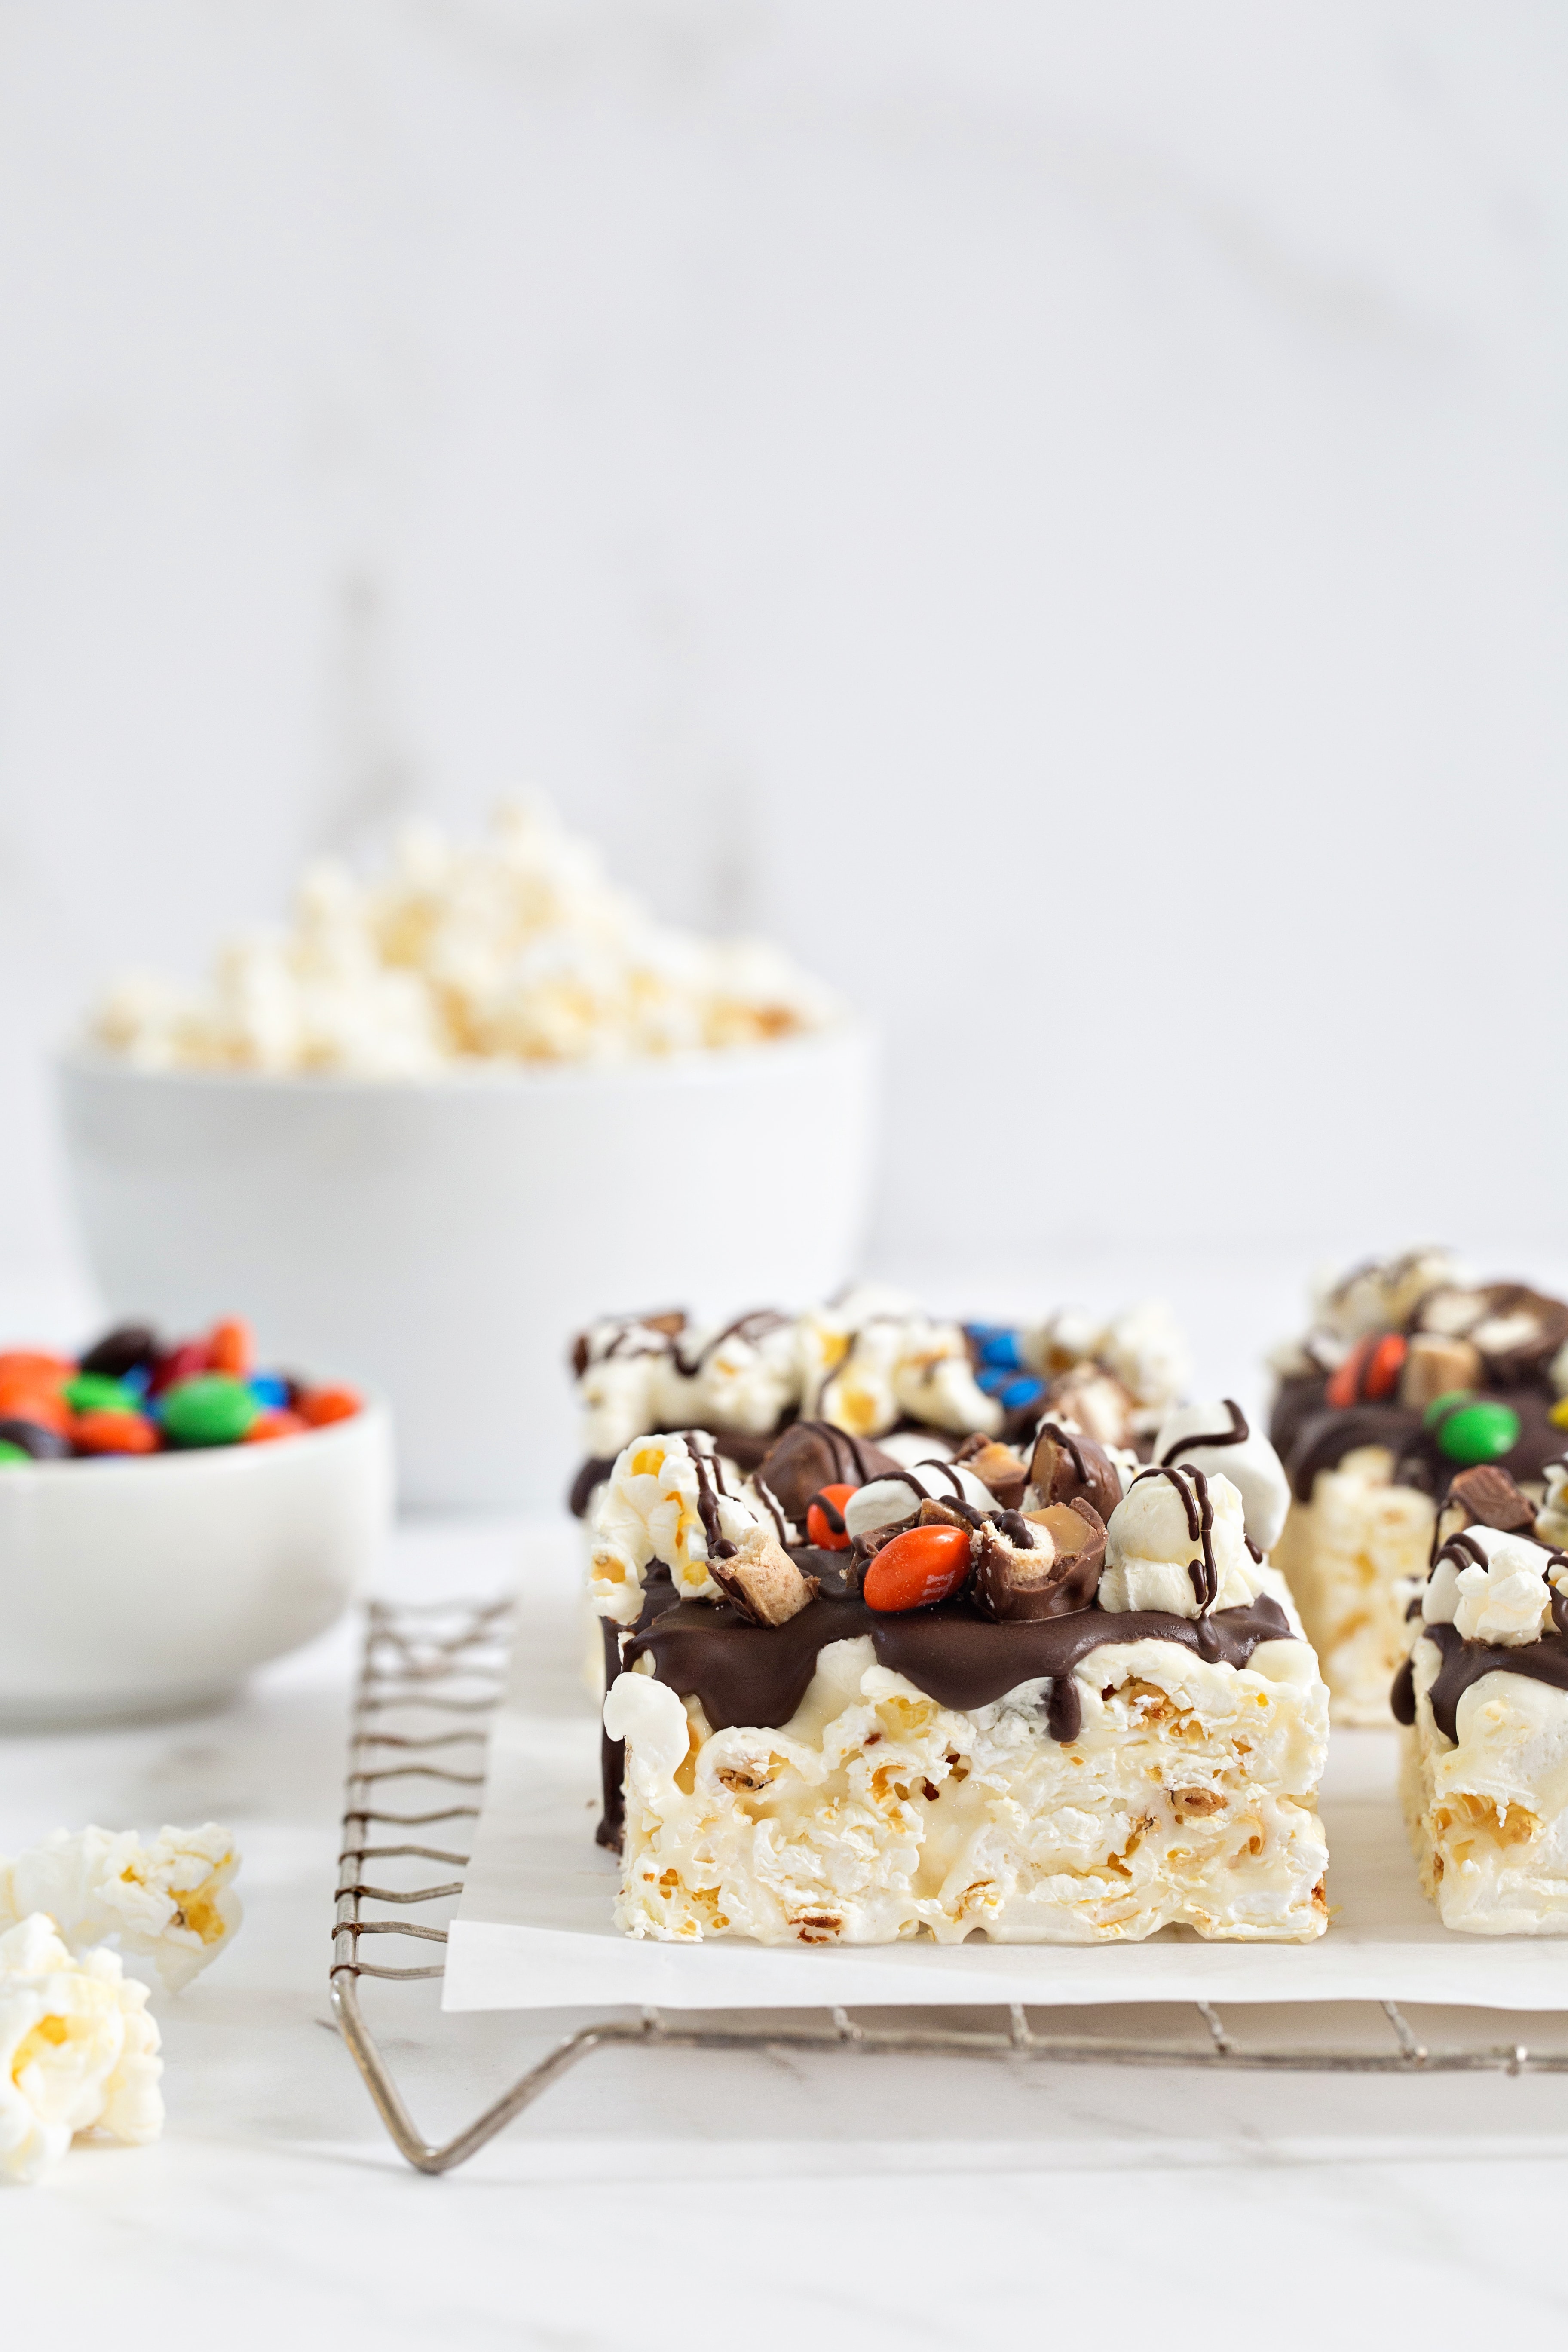 Take your movie night to the next level with these Movie Theater Popcorn Bars! Sweet, salty and totally delicious!